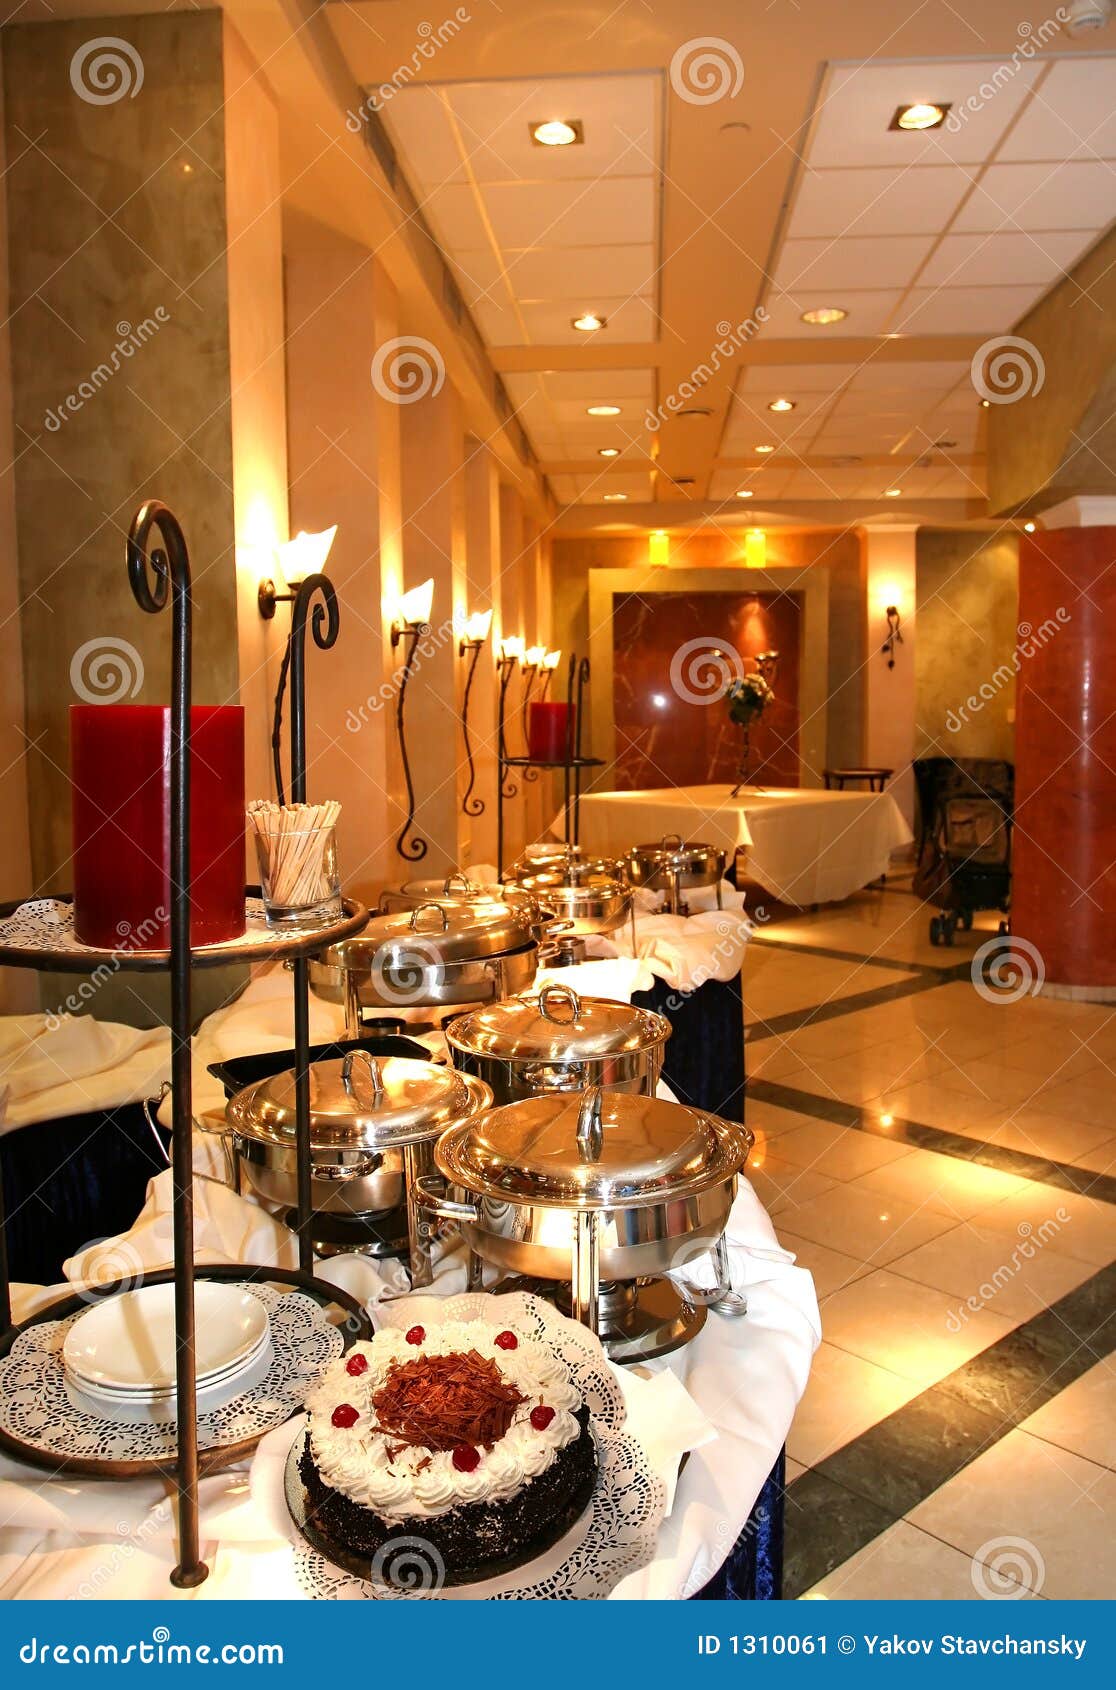 Interior Of Restaurant Stock Image Image Of Home Metal